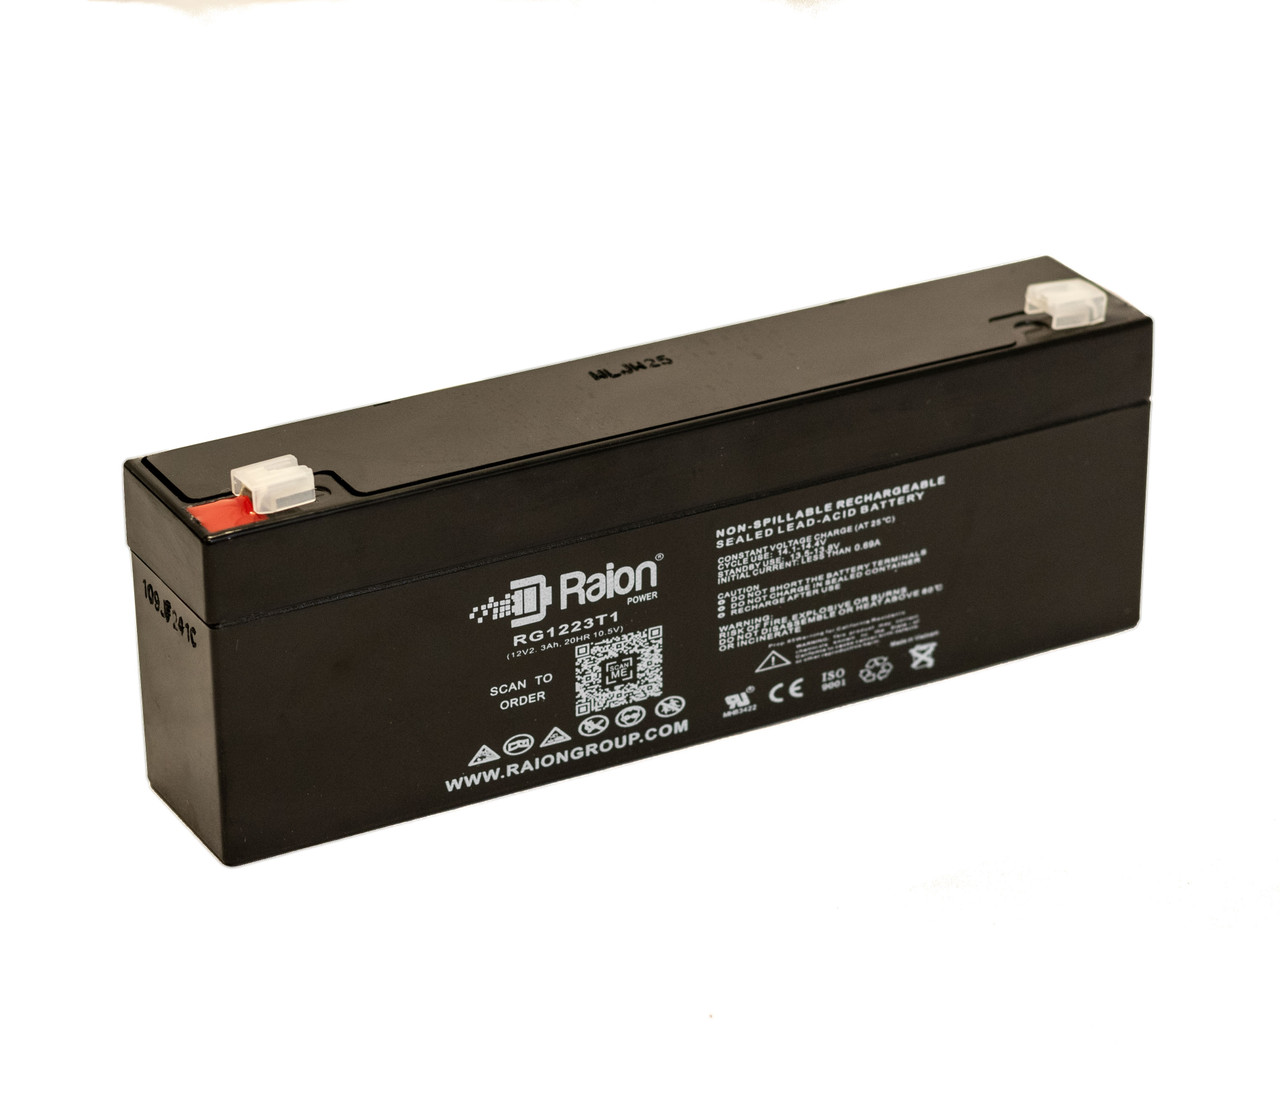 Raion Power RG1223T1 Replacement Battery for Criticare Systems 507S Patient Monitor